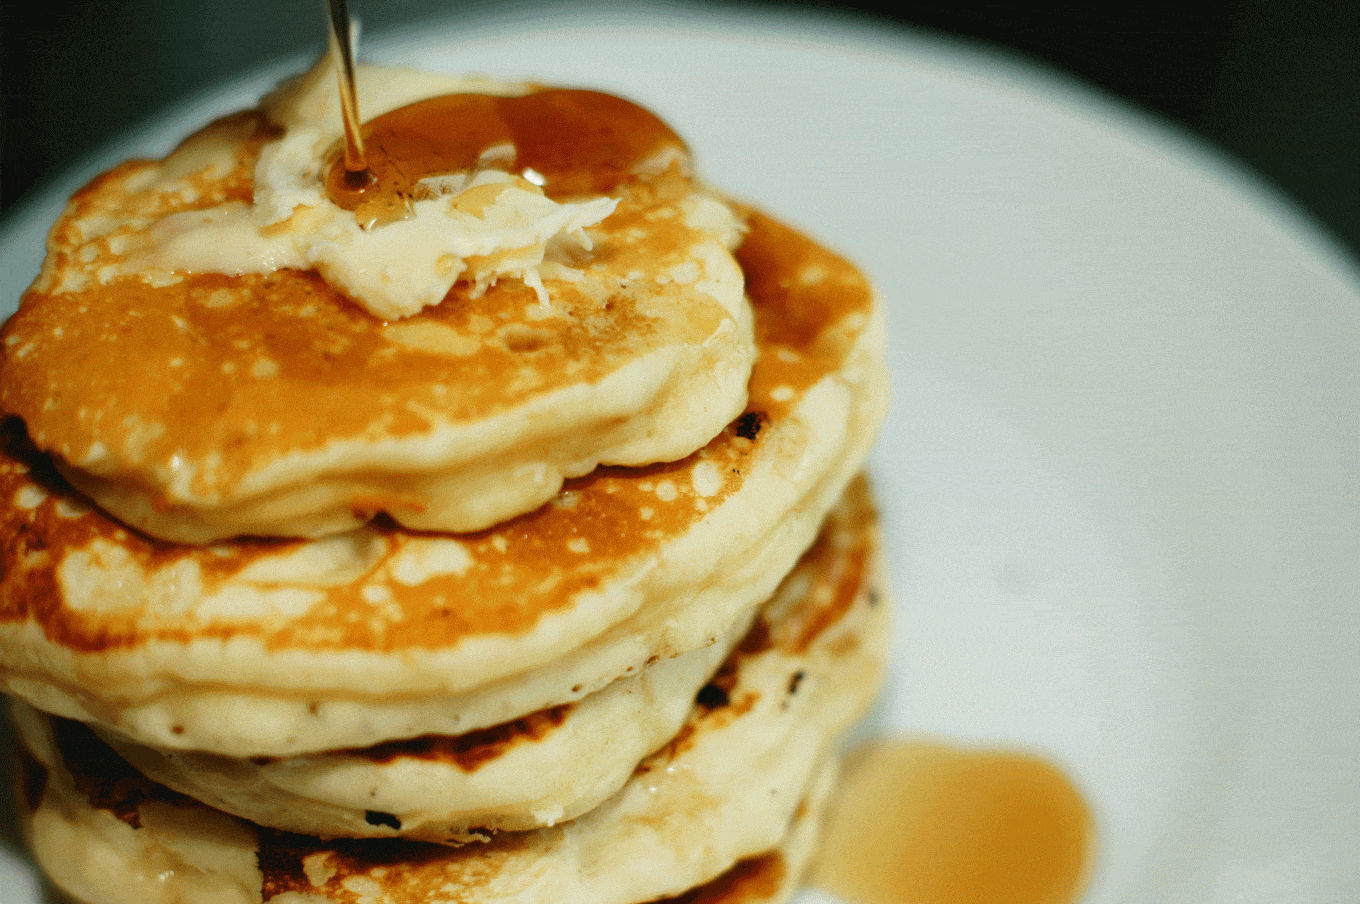 Golden maple syrup being drizzled on a pat of butter on top a stack of fluffy pancakes.